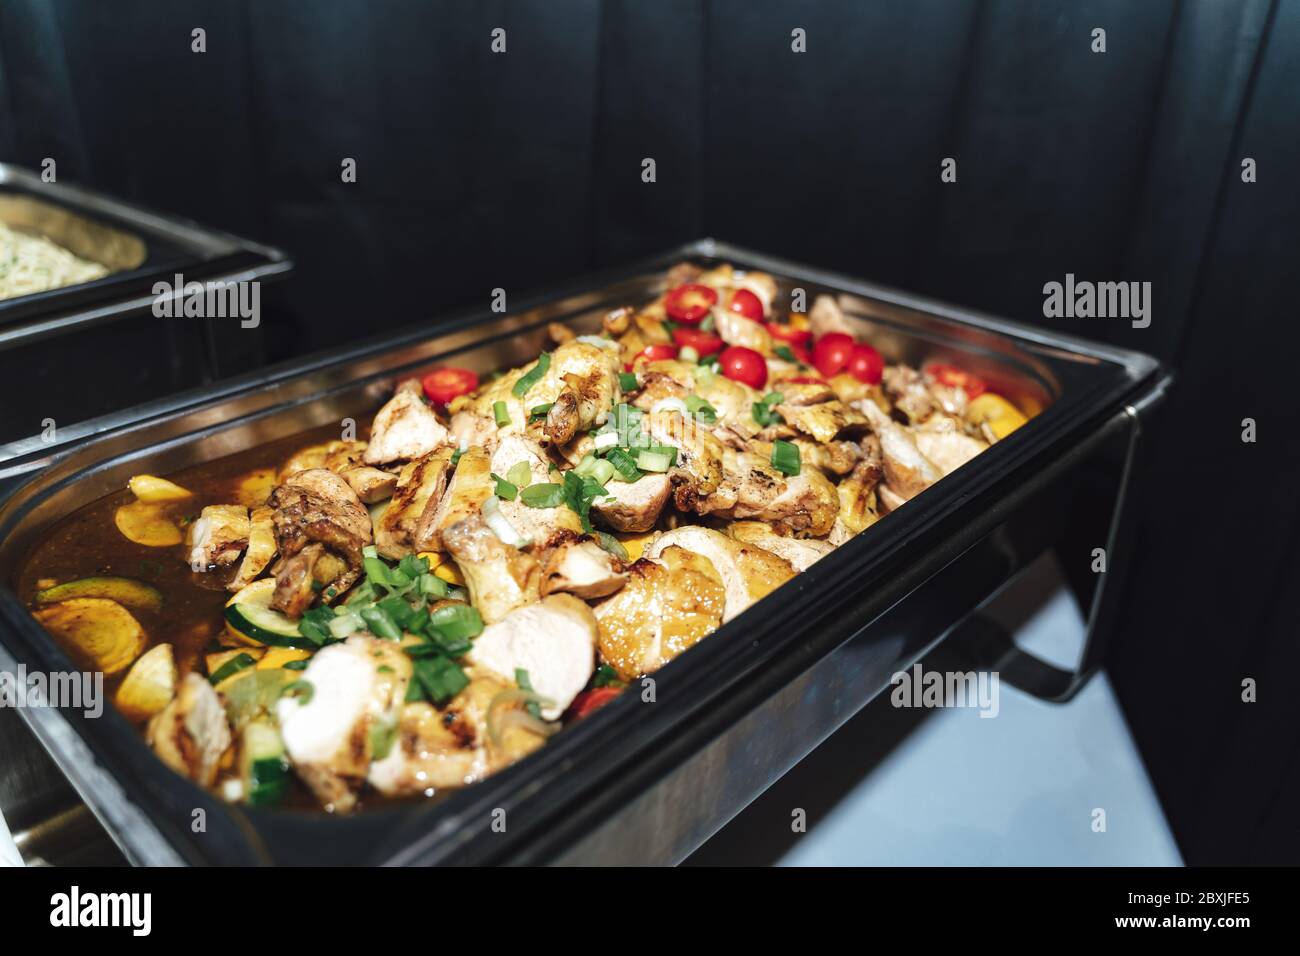 https://c8.alamy.com/comp/2BXJFE5/stainless-hotel-pans-on-food-warmers-with-various-meals-roasted-meat-pieces-with-vegetable-self-service-buffet-table-celebration-party-wedding-2BXJFE5.jpg